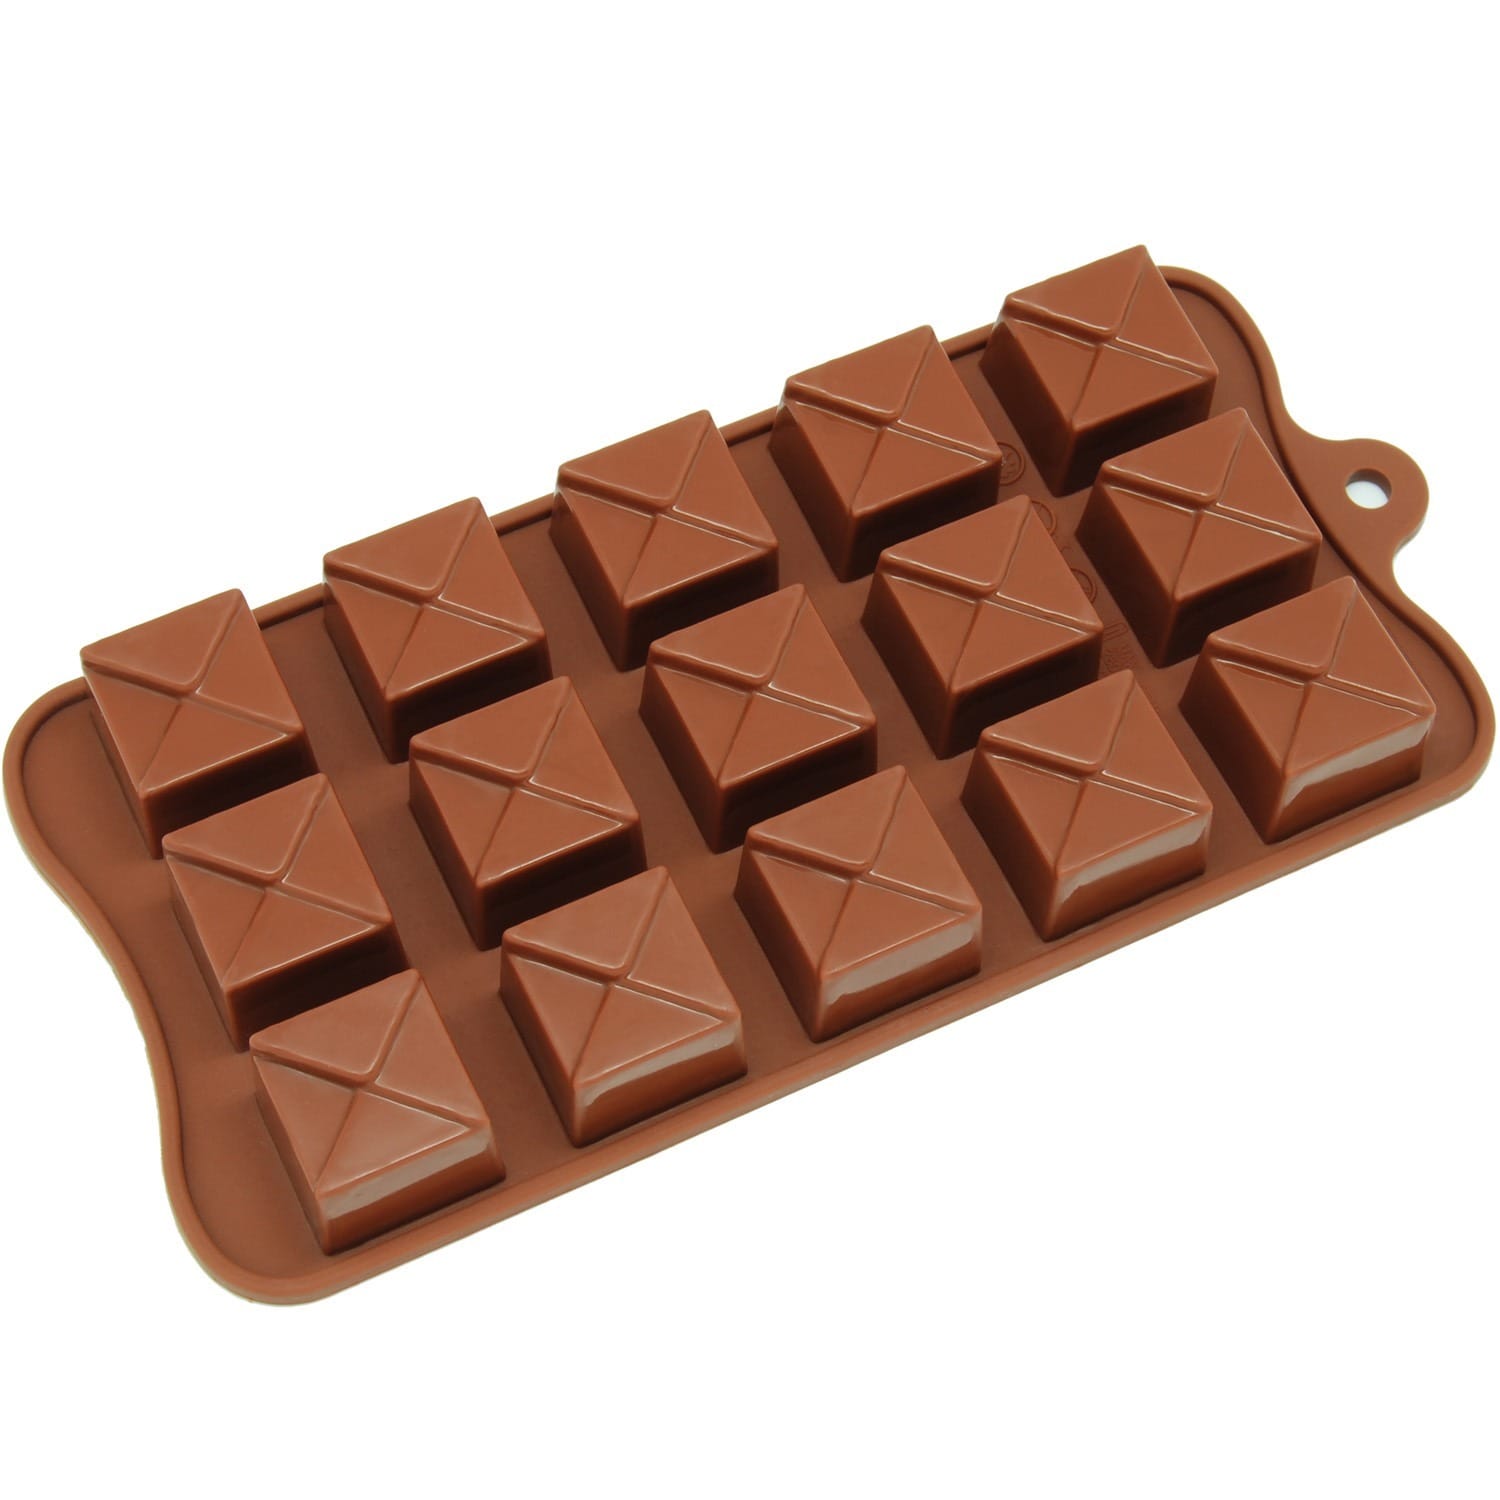 Freshware Brown 15-cavity Square Chocolate and Candy Silicone Mold -  Overstock - 8355302